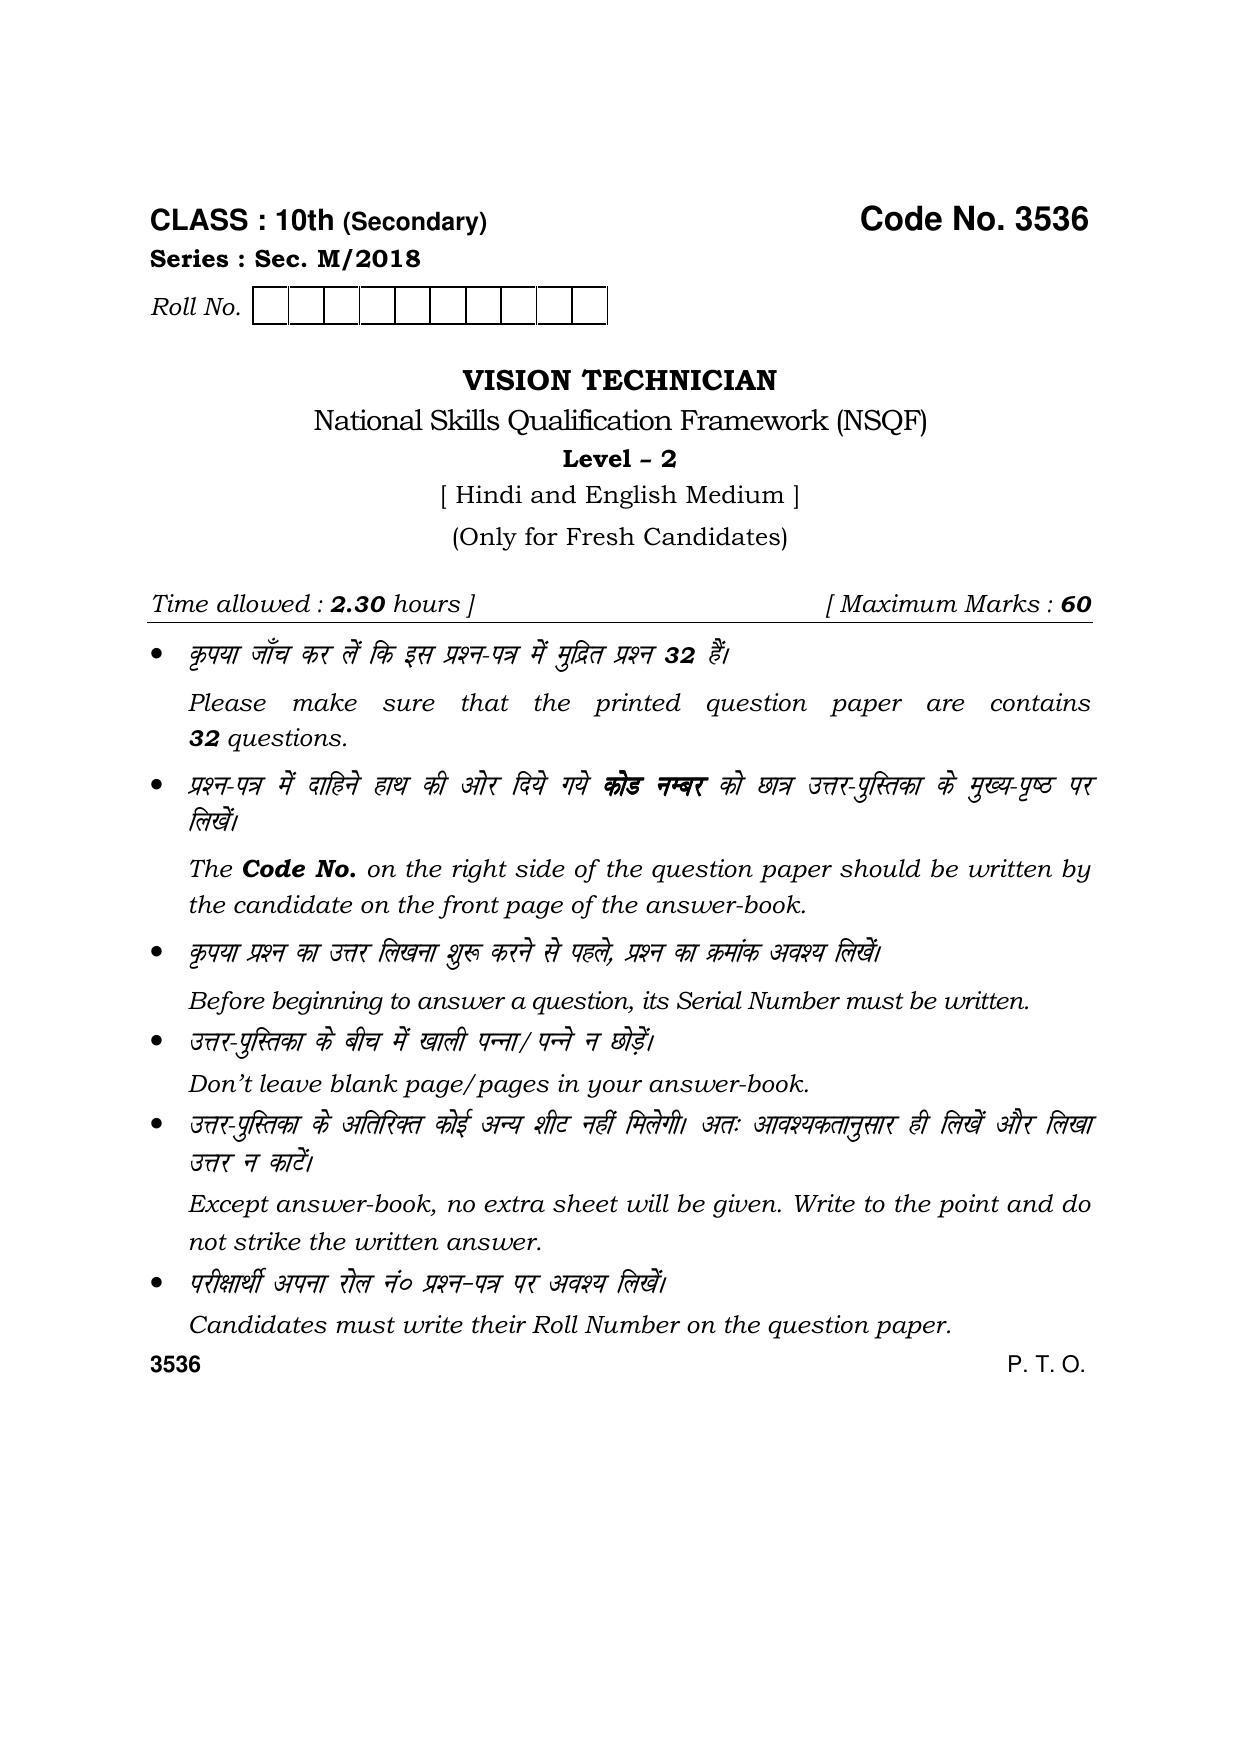 Haryana Board HBSE Class 10 Vision Technician 2018 Question Paper - Page 1